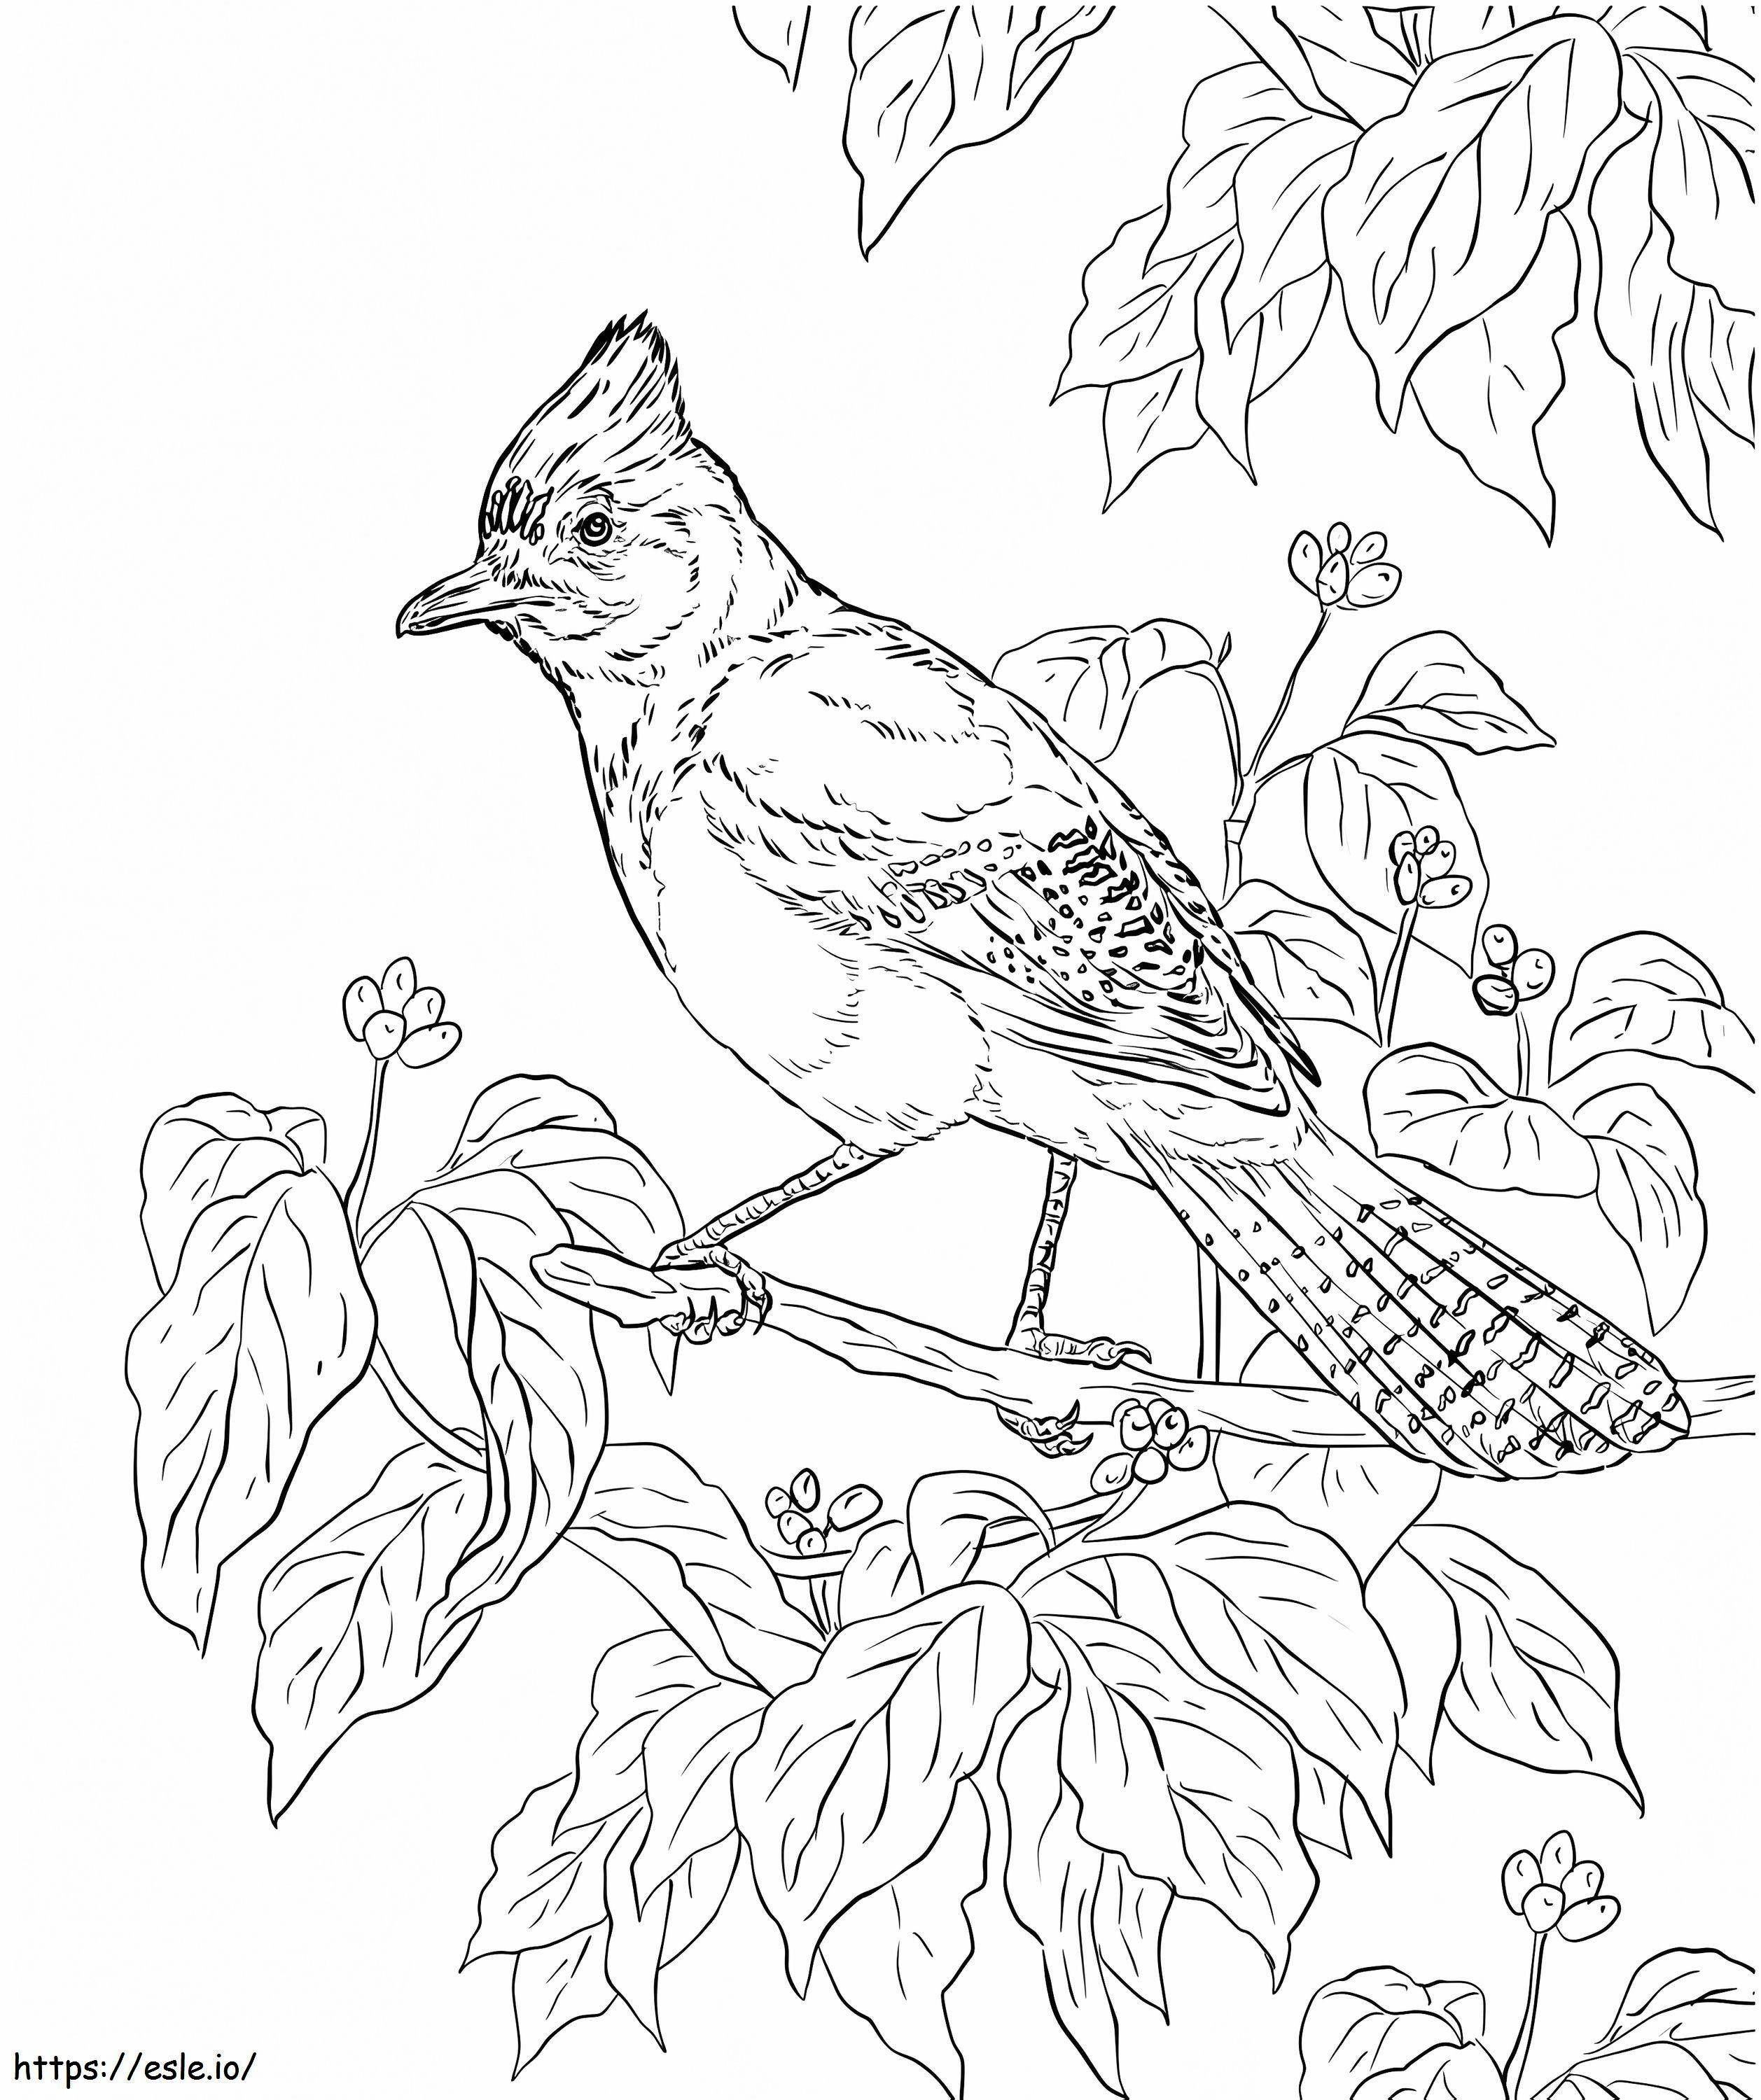 1560413646 Jays On Branch A4 coloring page